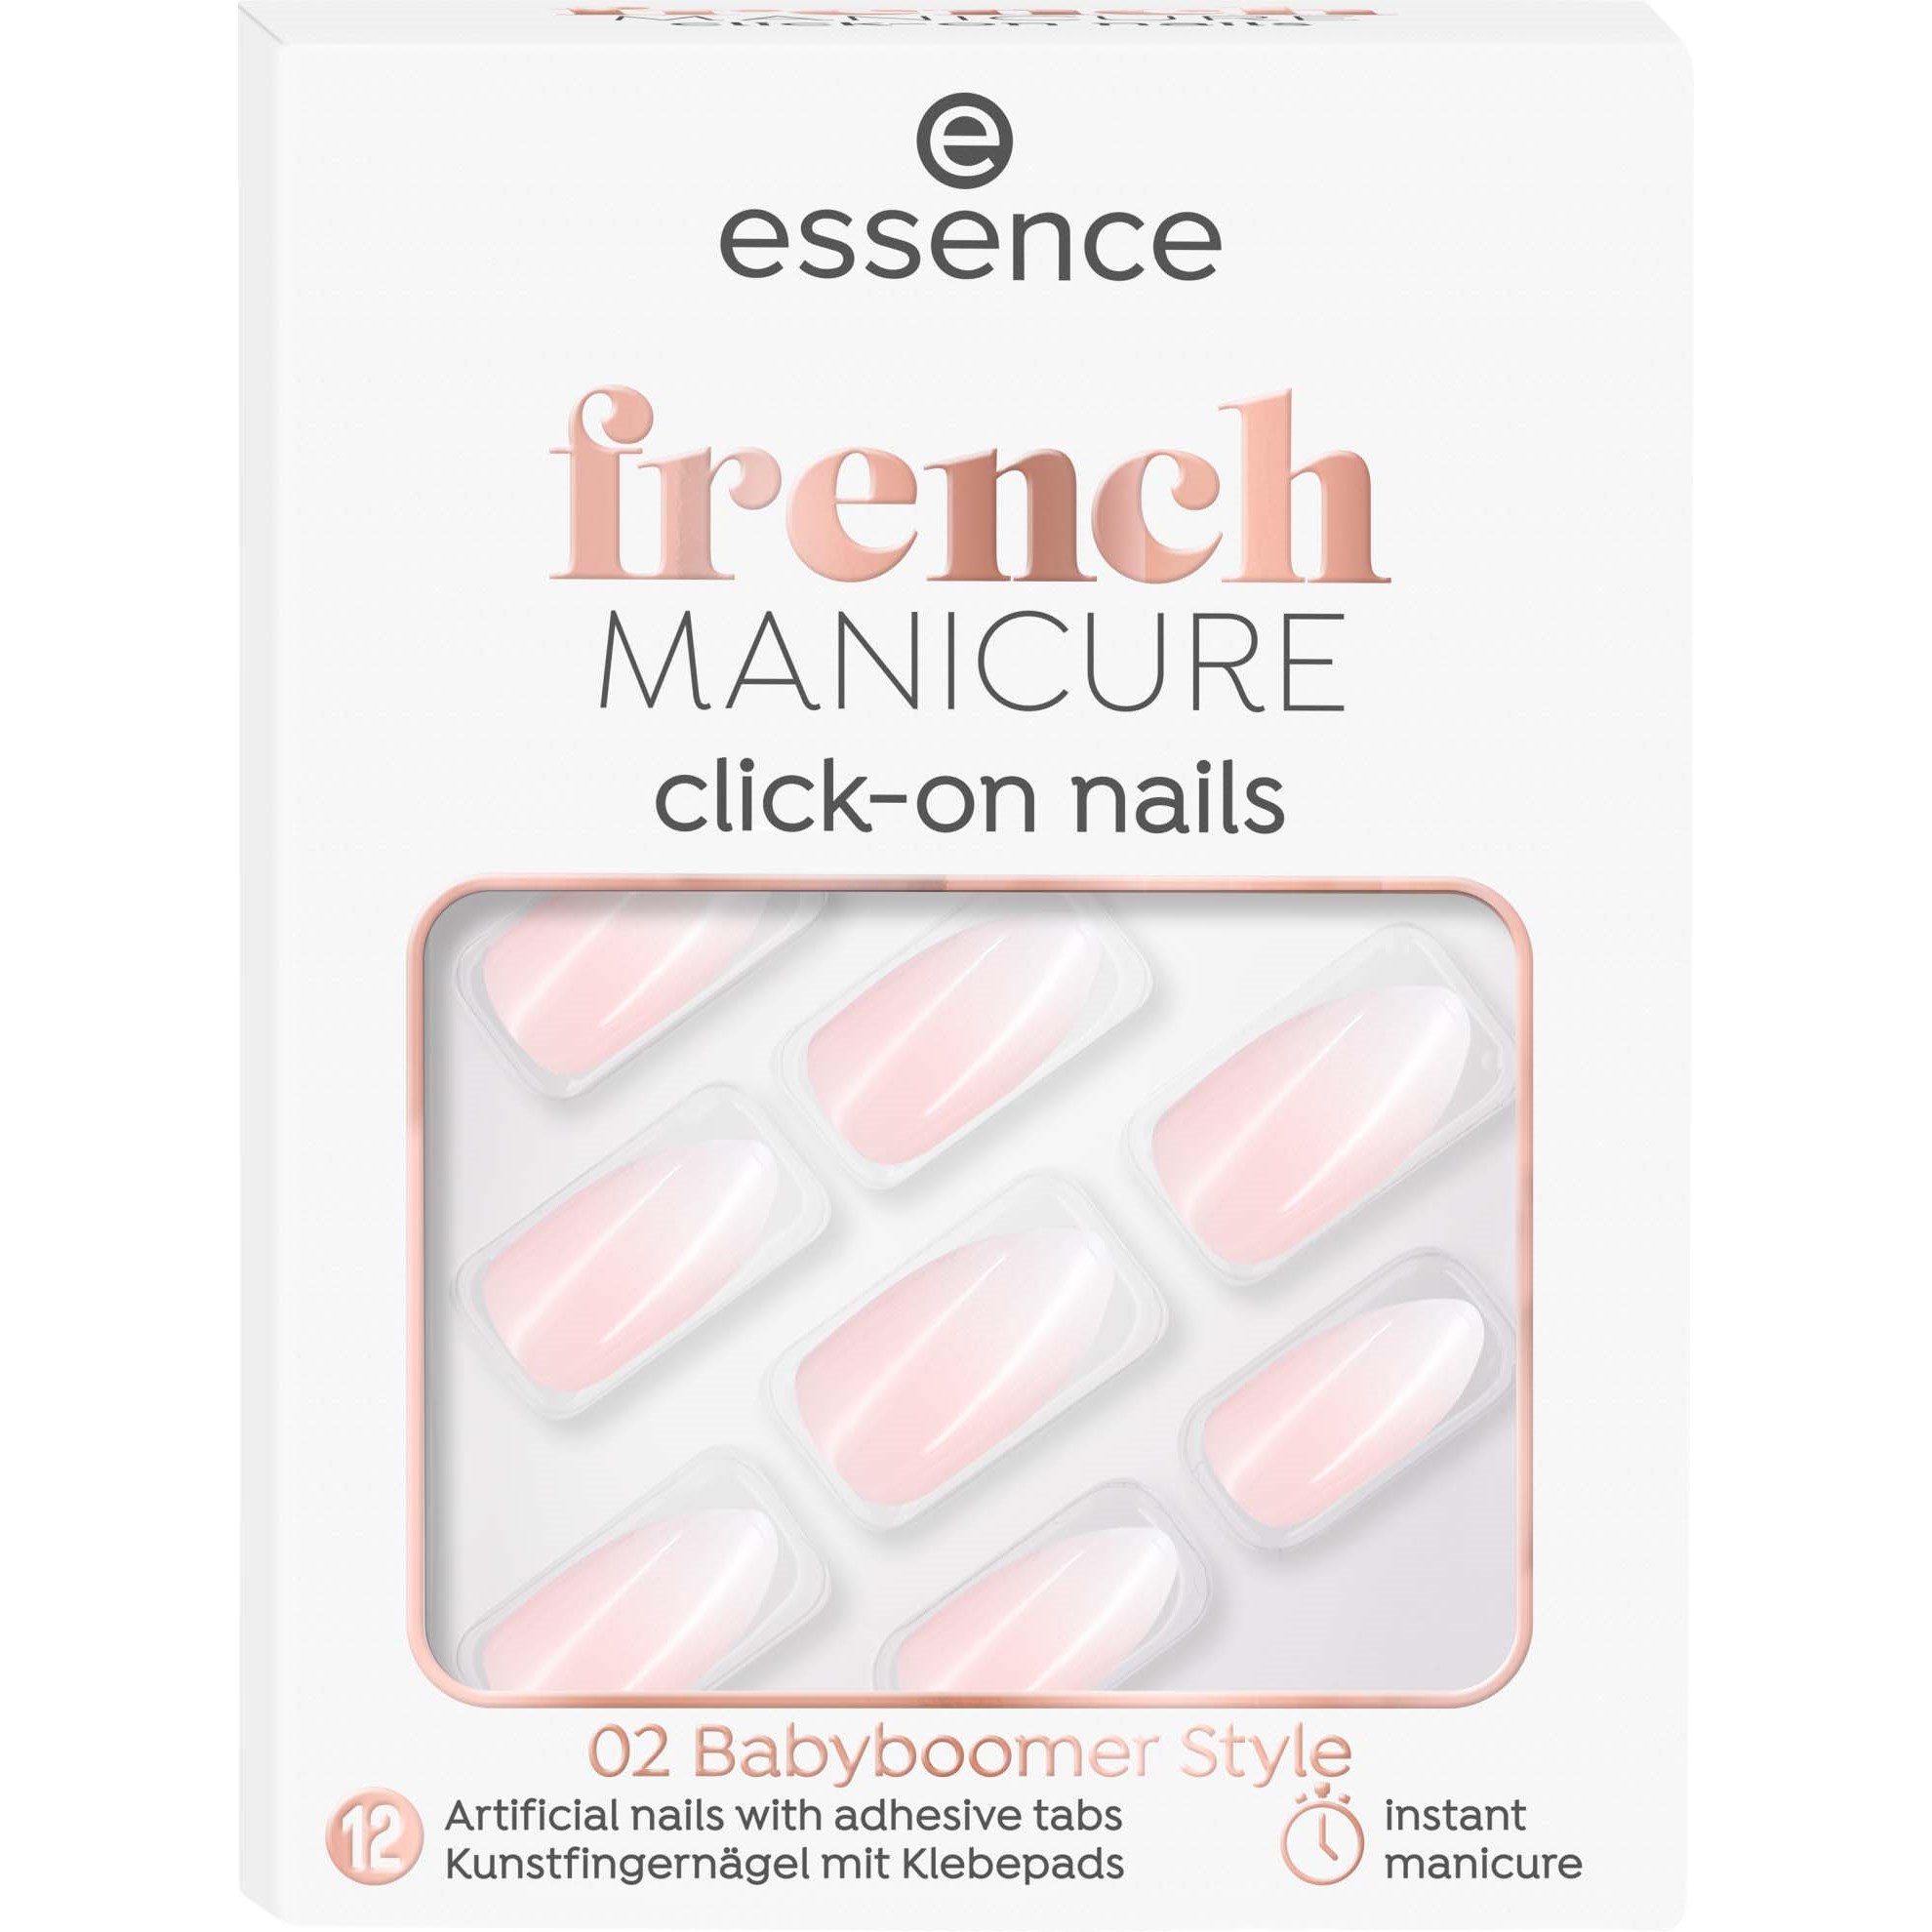 Läs mer om essence French Manicure Click-on Nails 02 Babyboomer Style